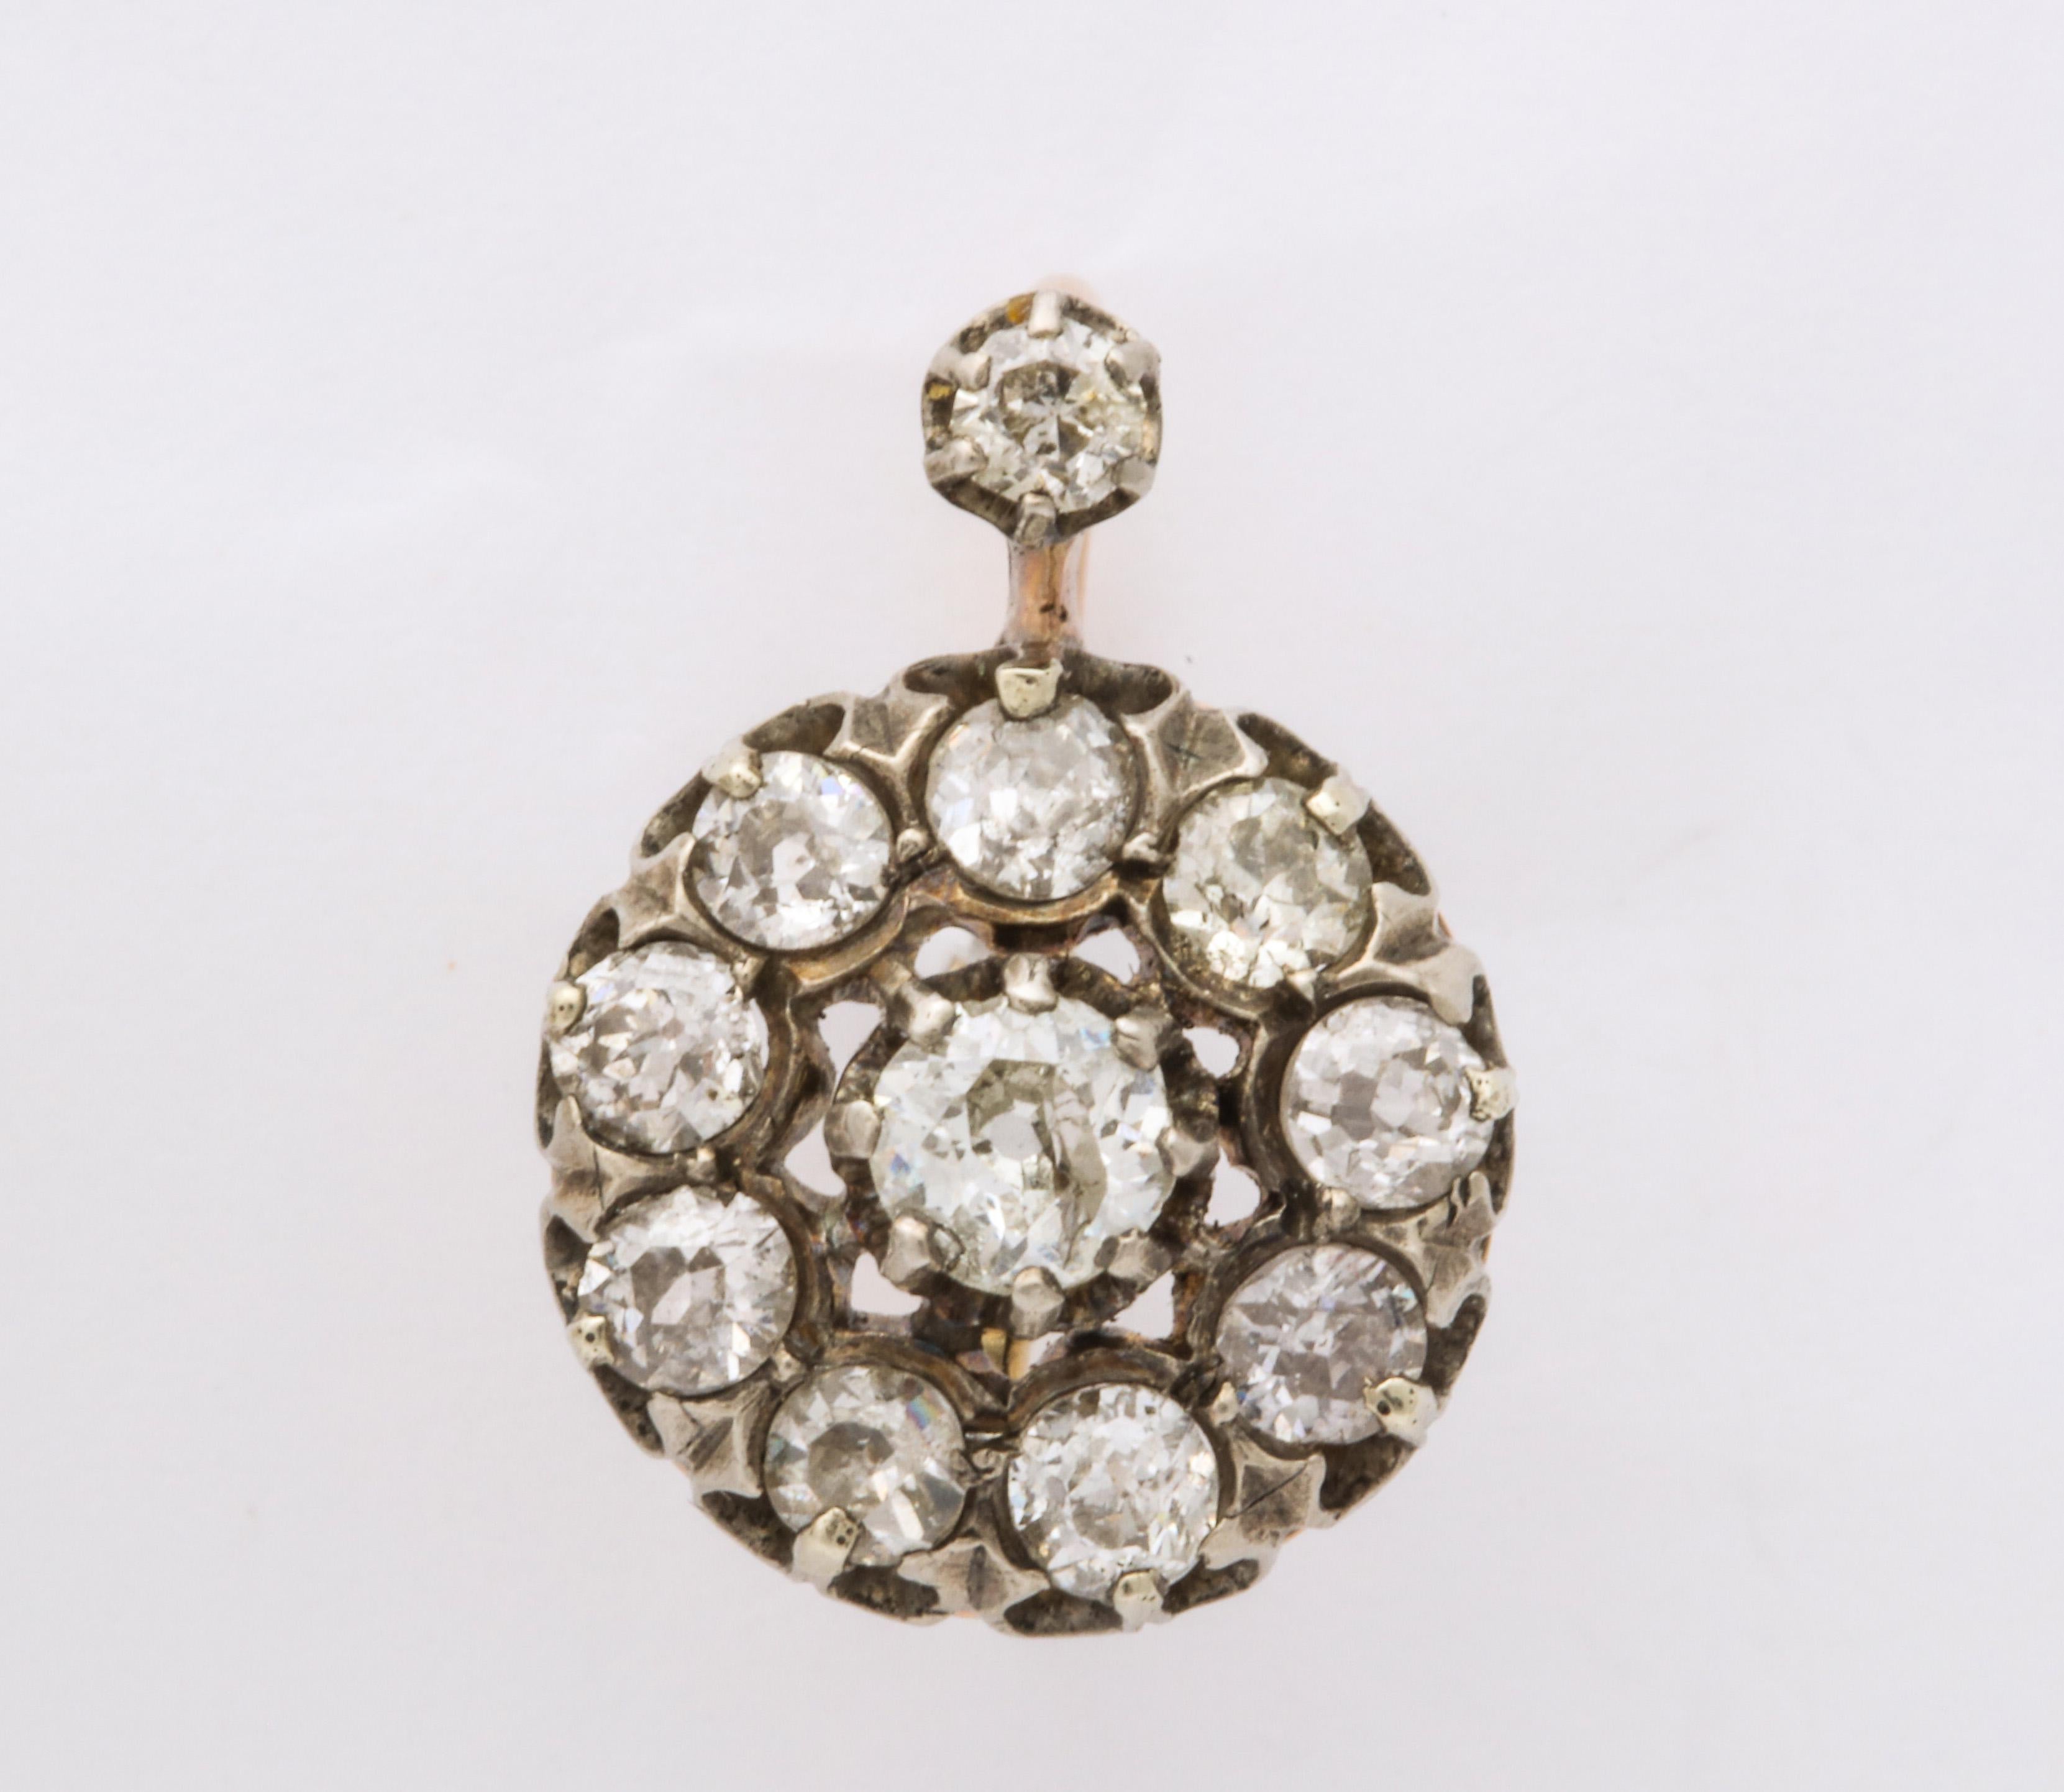 Bright, white diamonds old mine and european cut, look brilliant in these dropped cluster earrings from the Victorian collection. Approximate total weight in situ 2.5cts. The setting is 15kt gold covered with silver around the diamonds so as not to